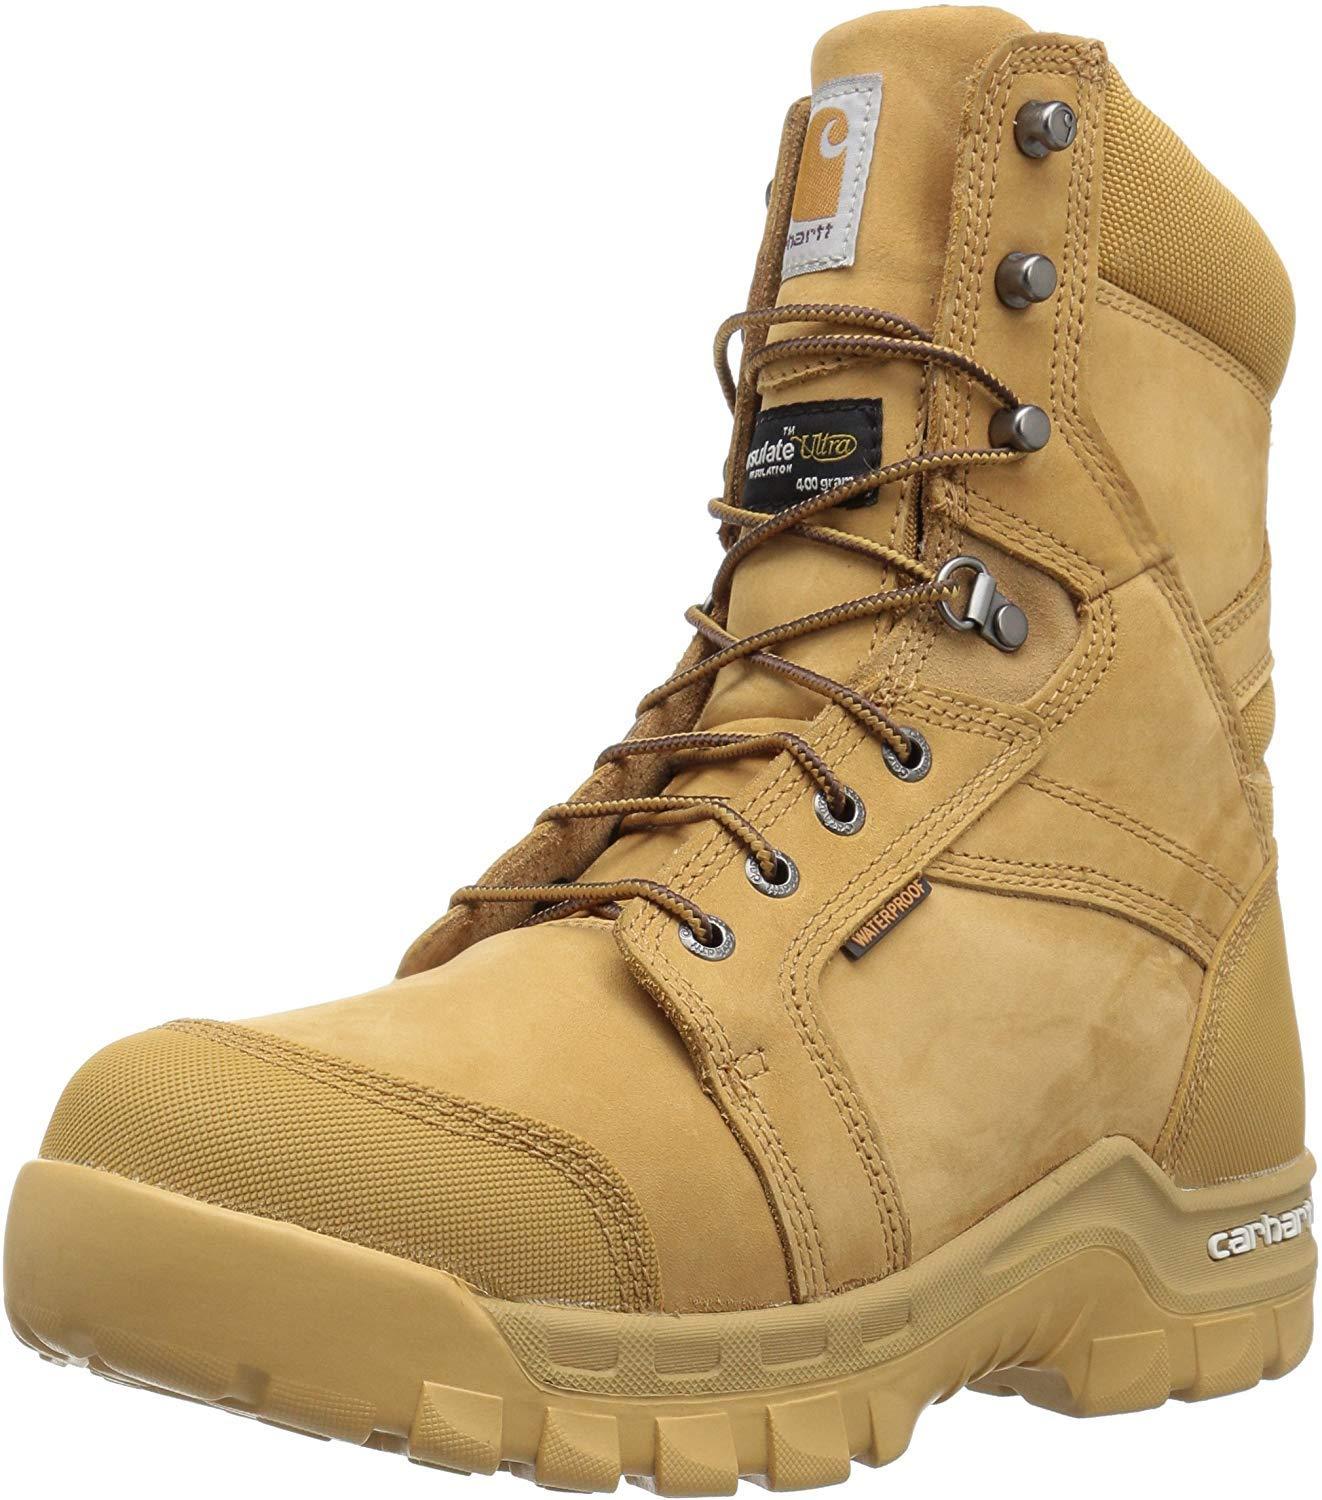 insulated soft toe work boots